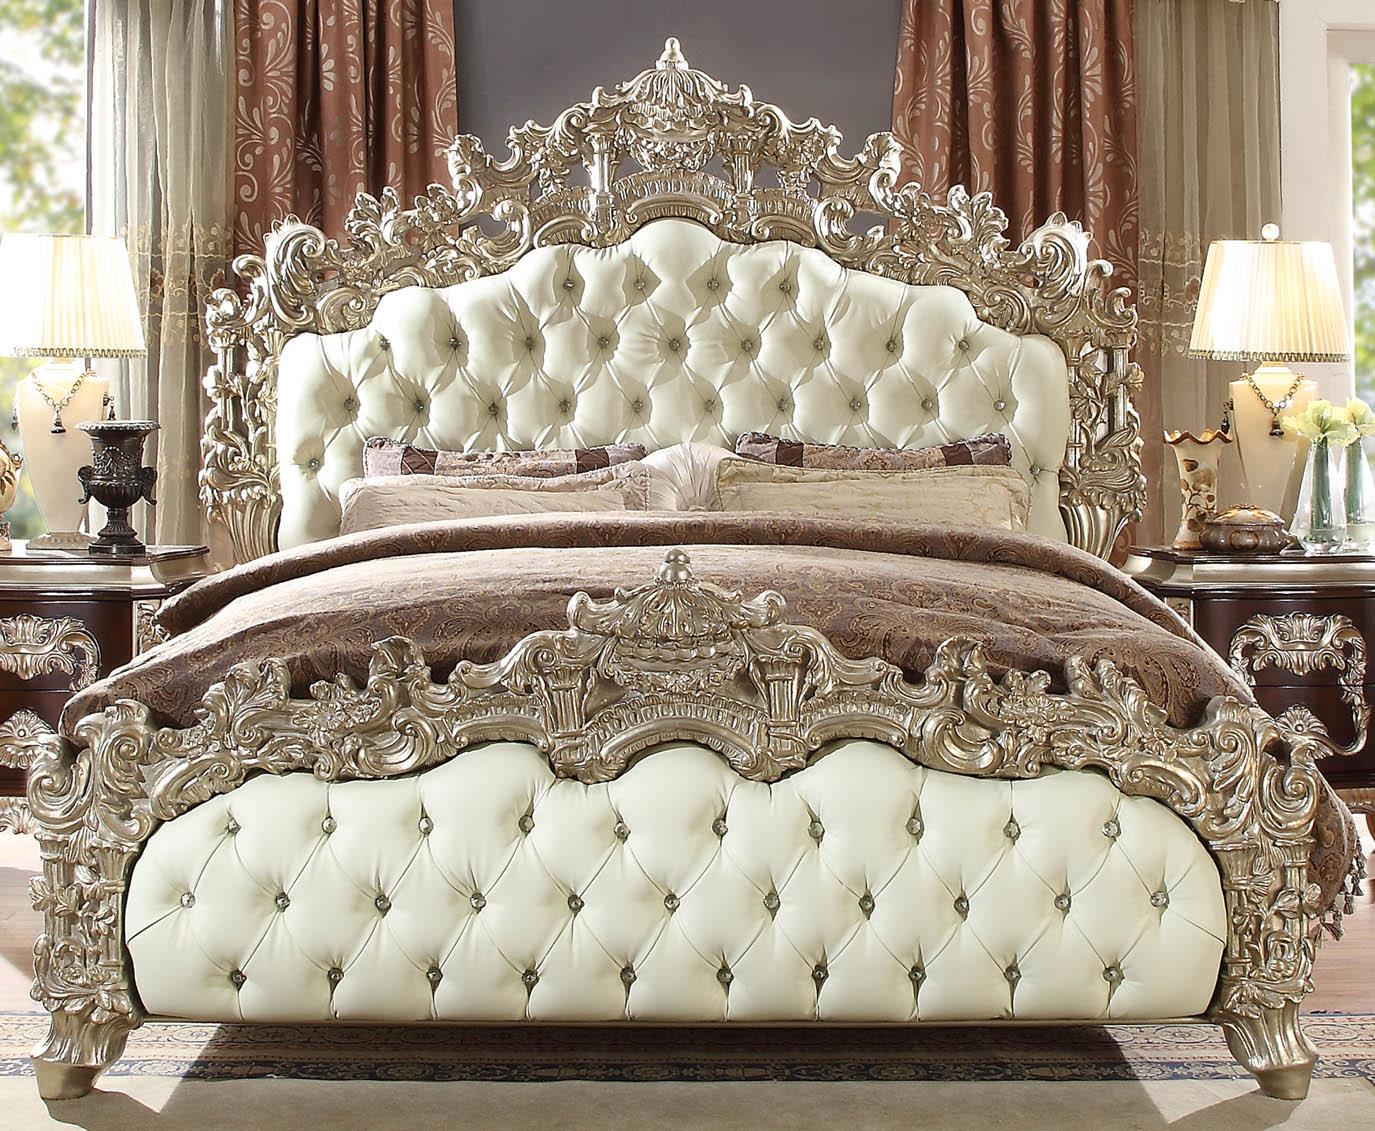 Traditional Panel Bed HD-8017 HD-8017 – EK BED in Antique Silver, Antique White Leather